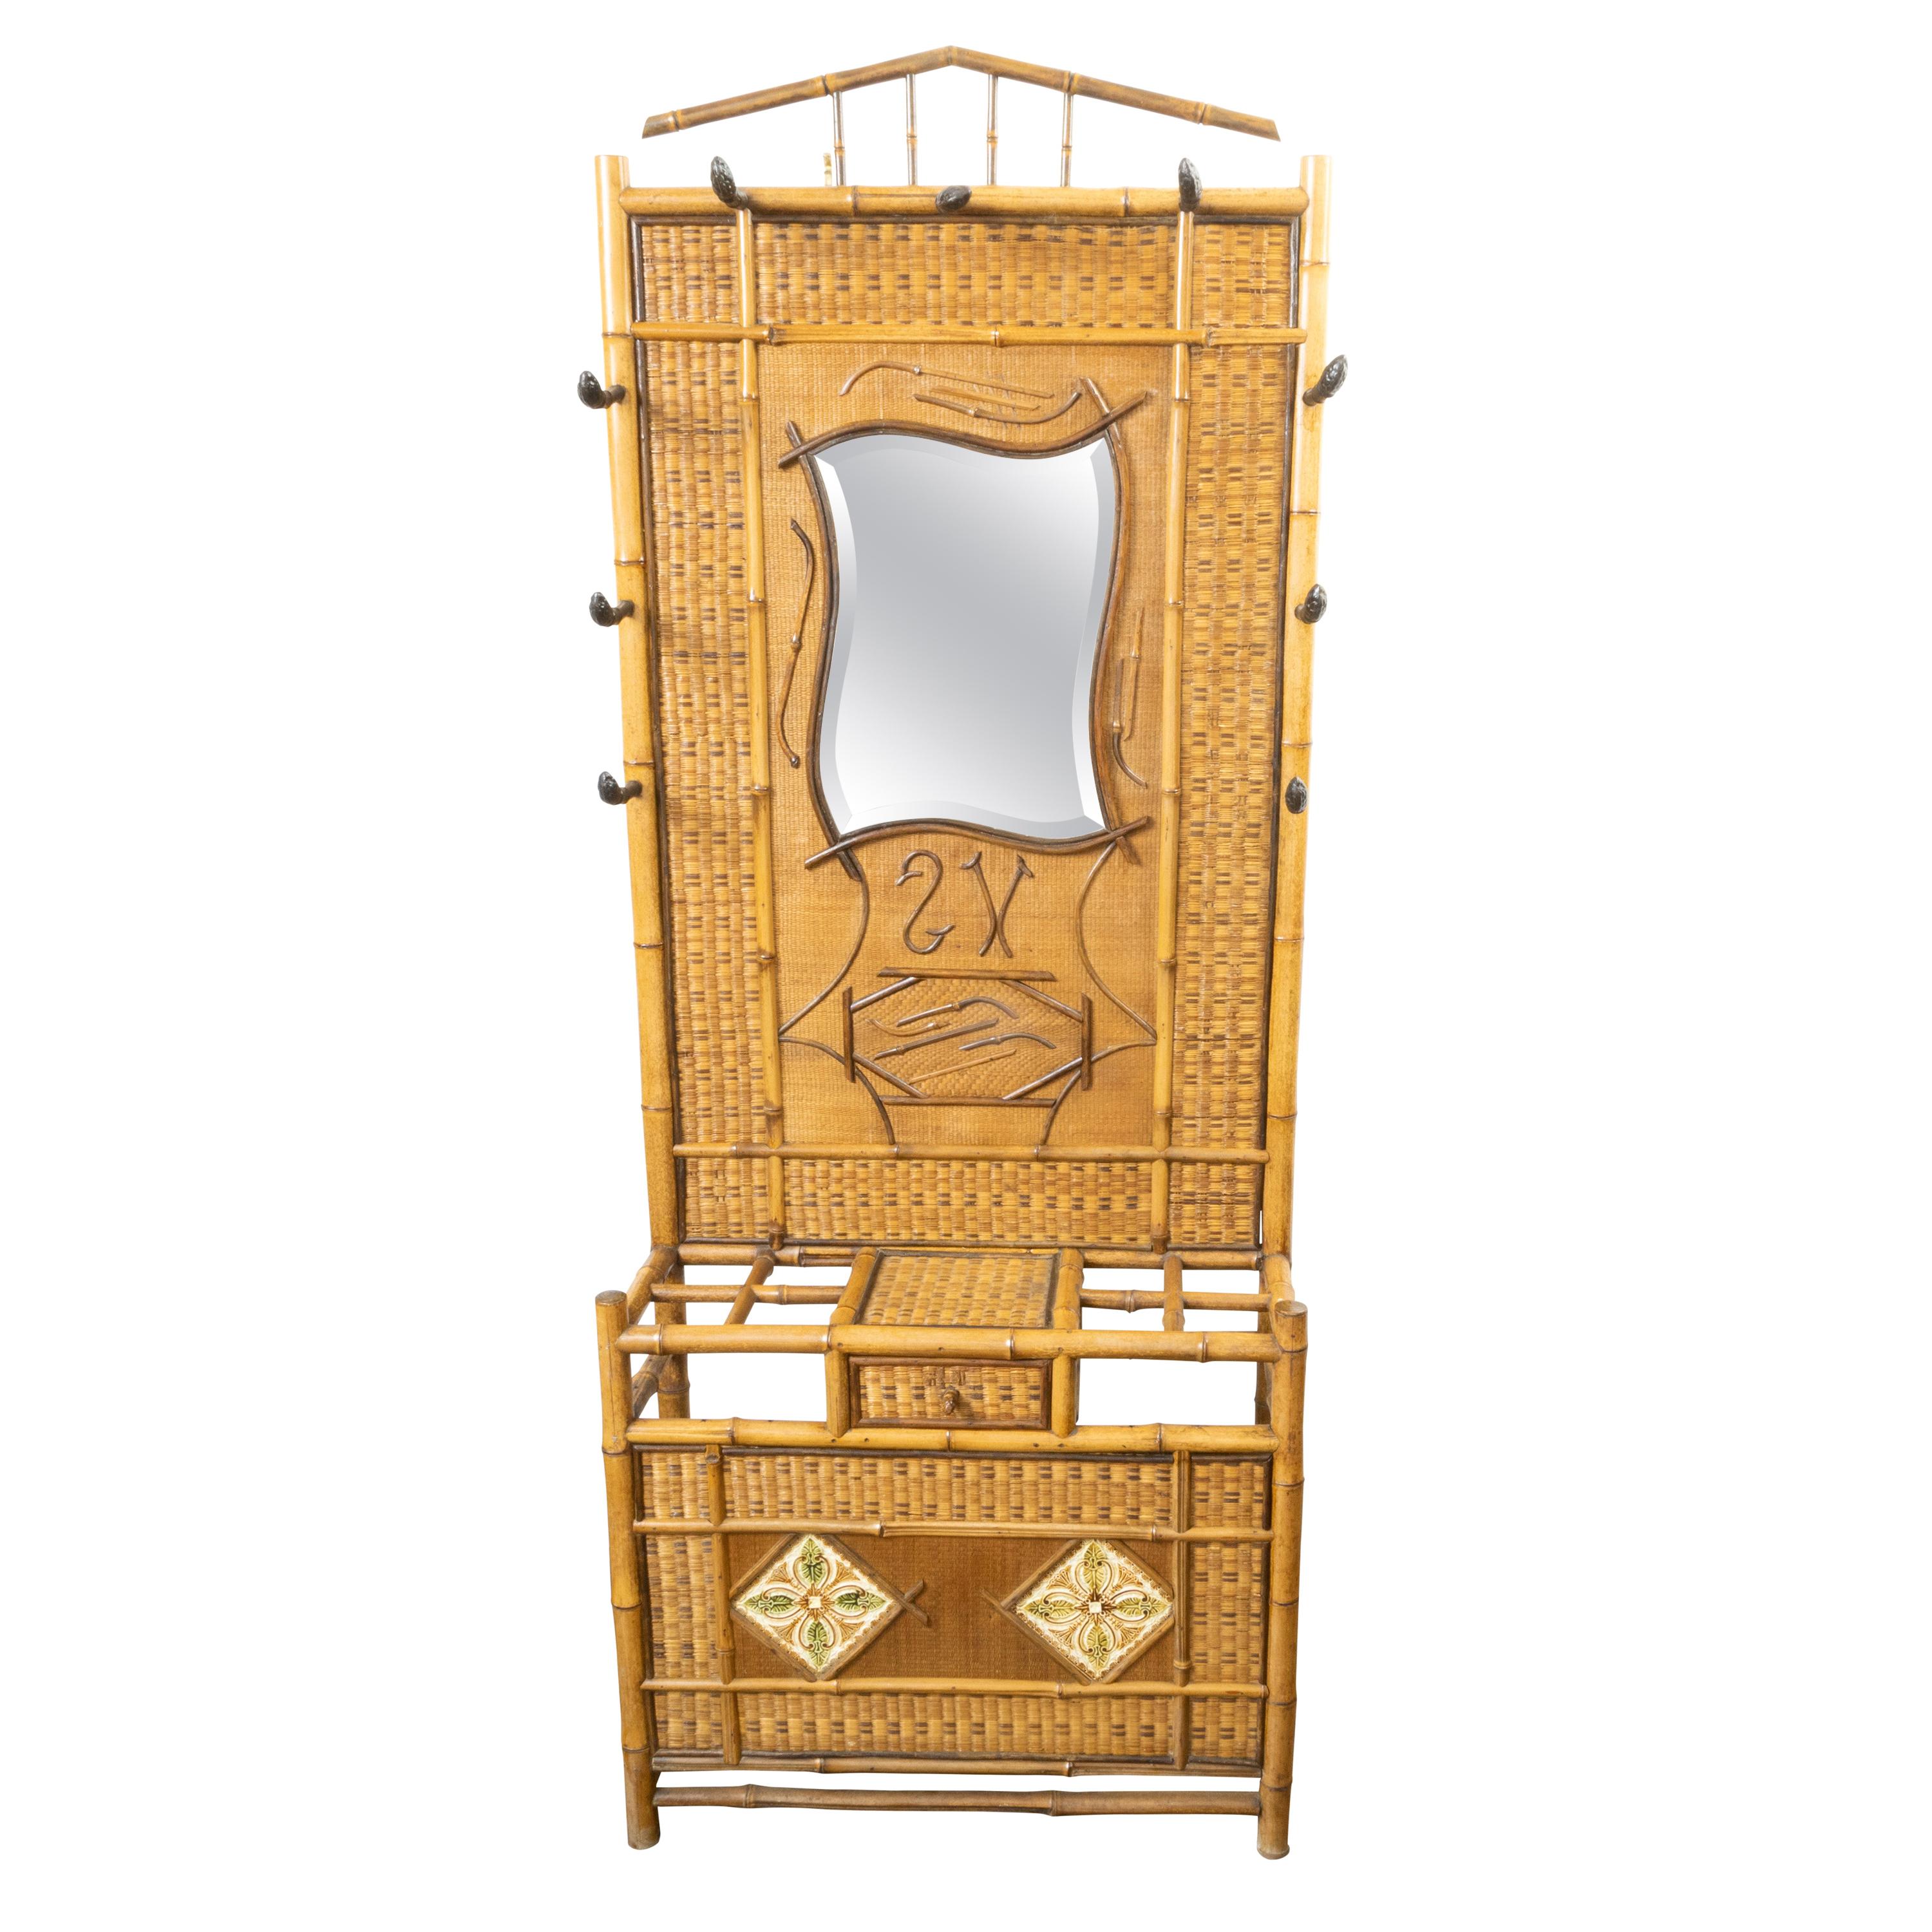 English 1880s Freestanding Bamboo and Rattan Hat Rack with Mirror and Tiles